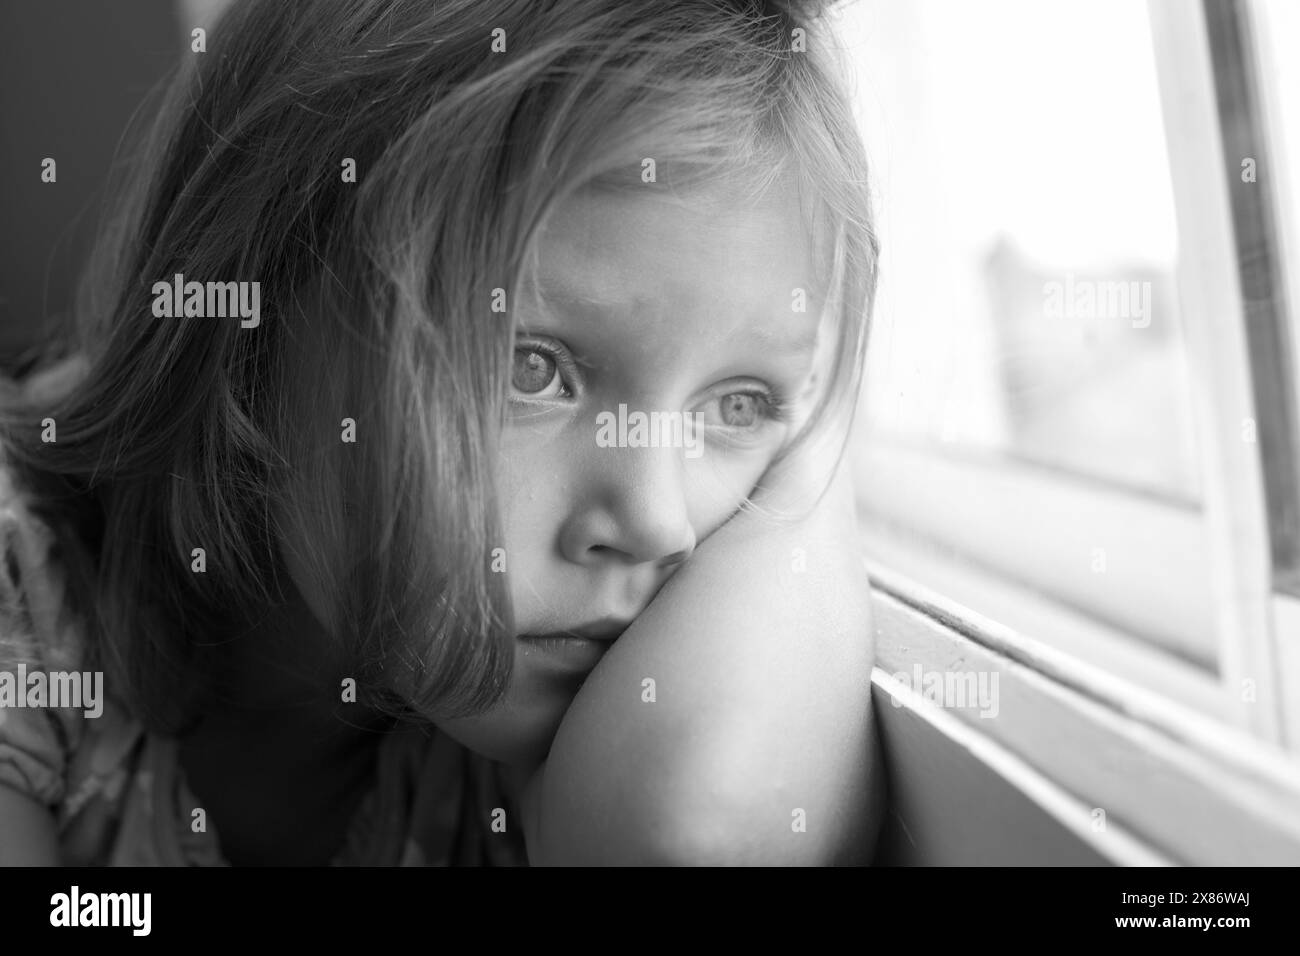 sad little girl looking out the window Stock Photo